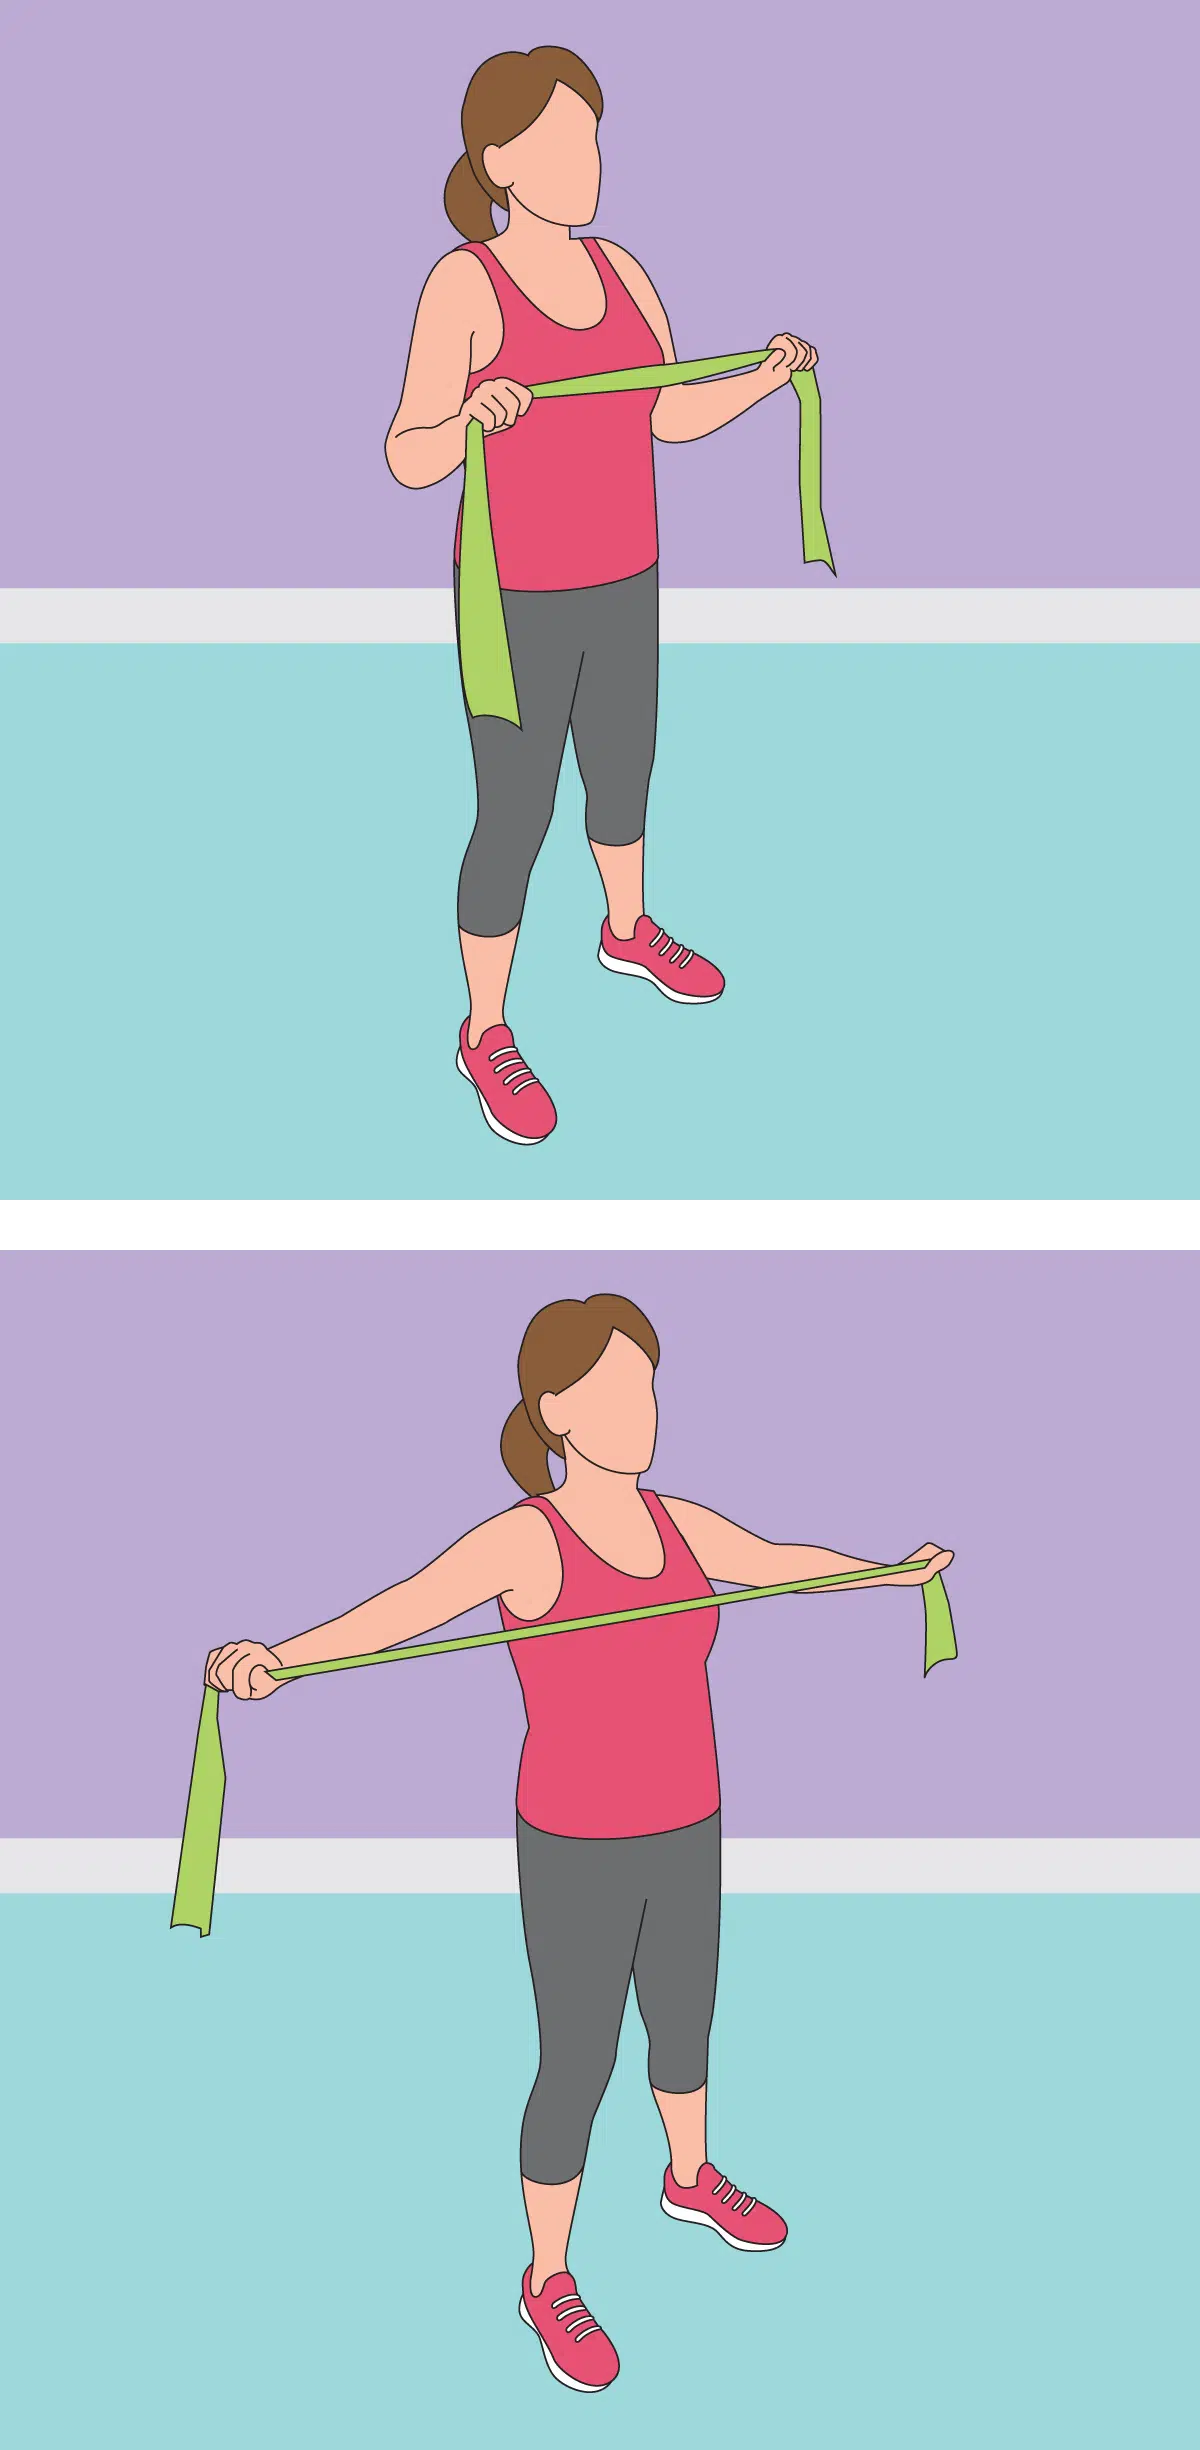 5 Lower Body Resistance Band Exercises for Runners